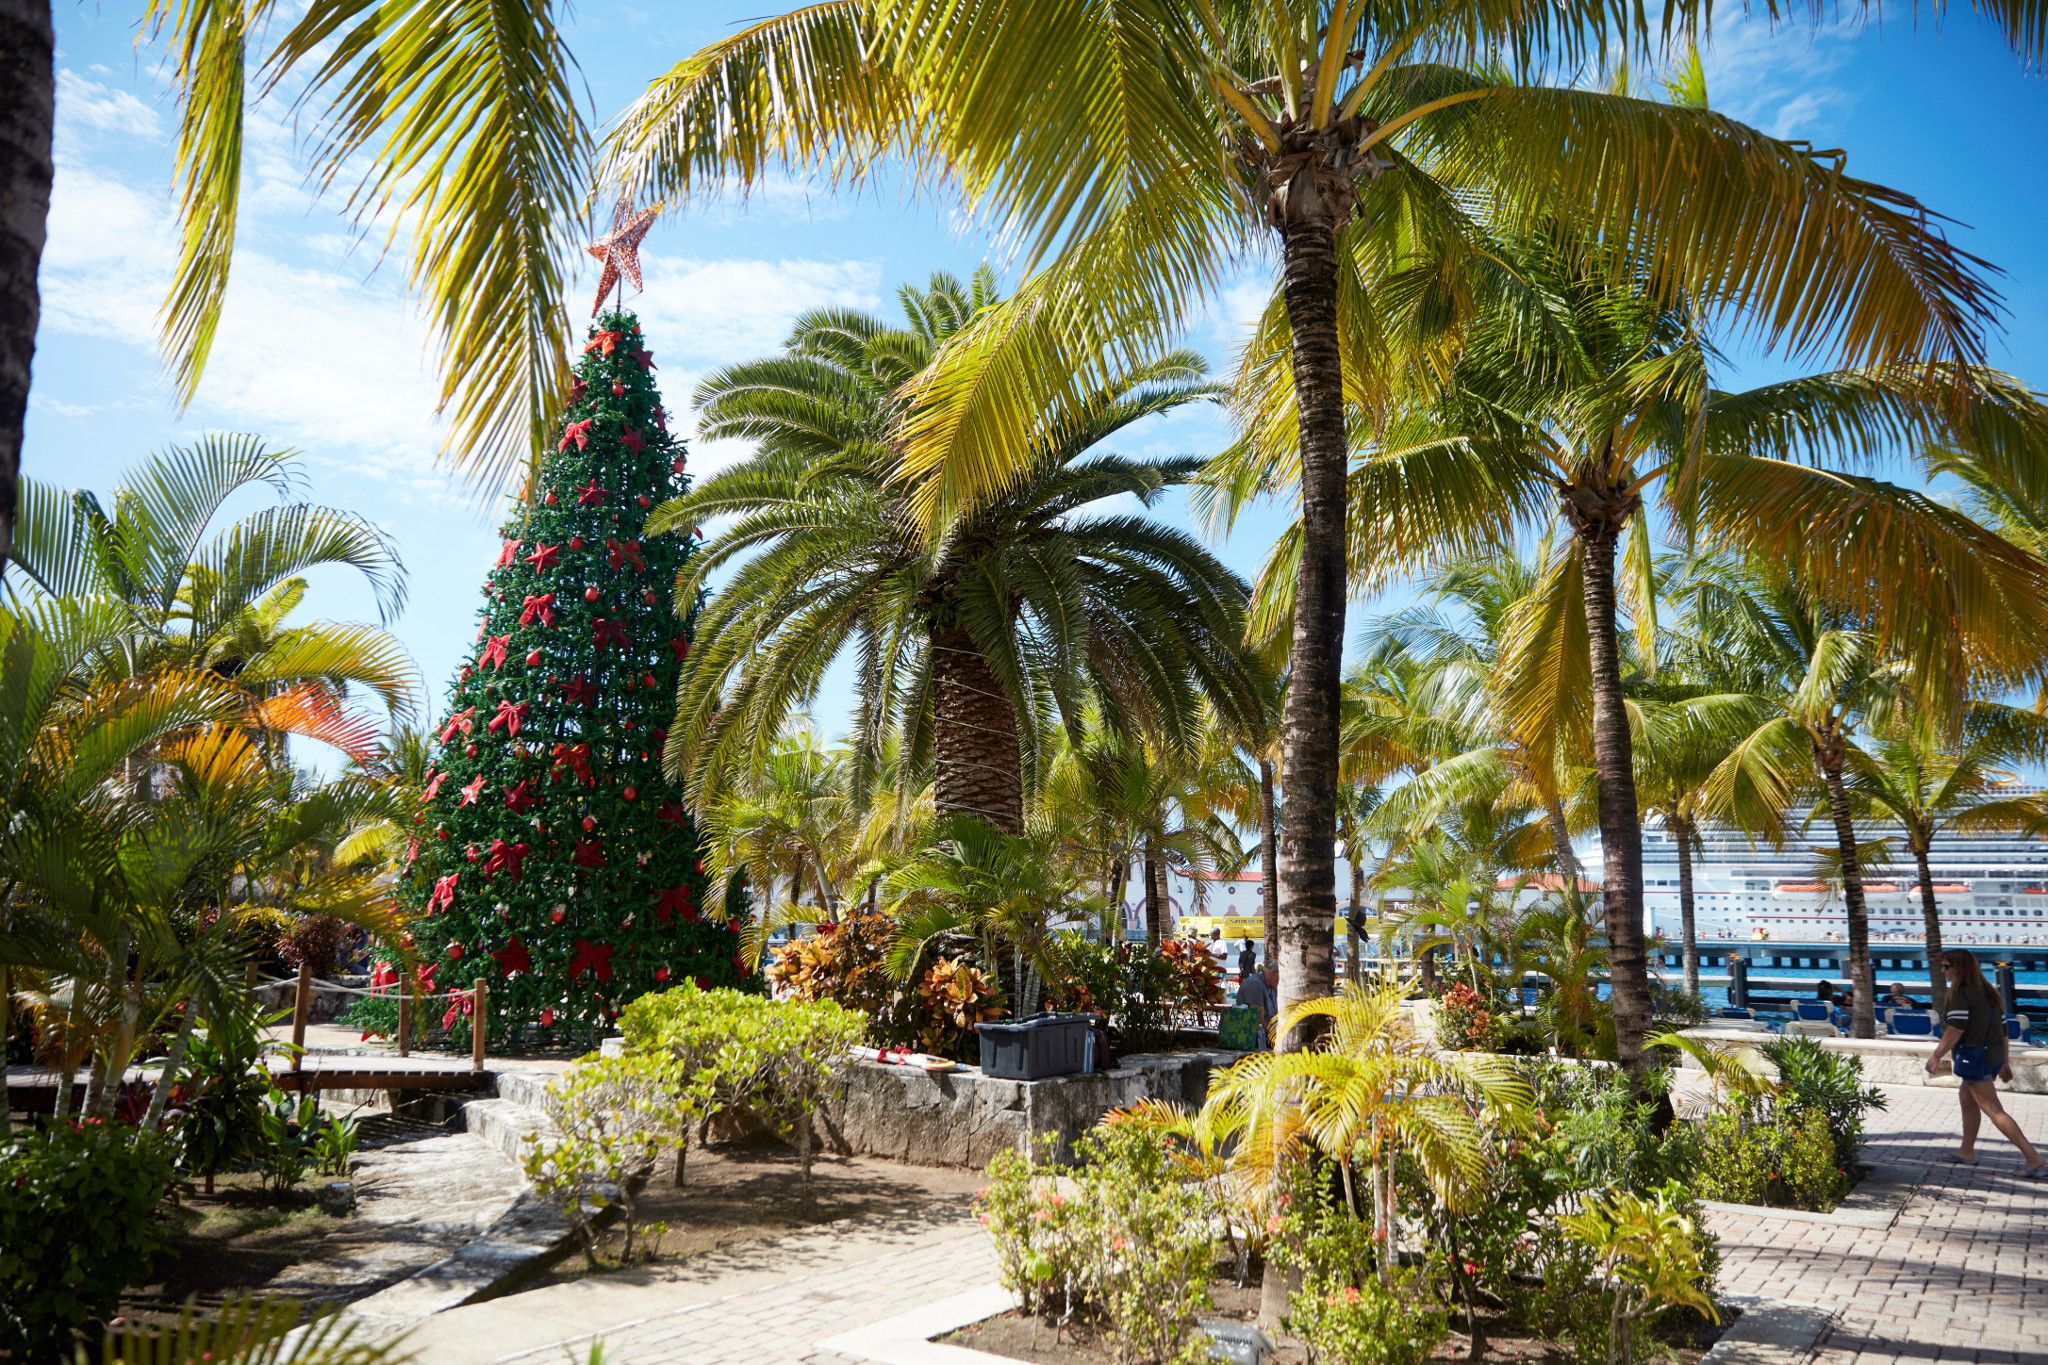 The Best Cruise Lines to Celebrate the Holidays On